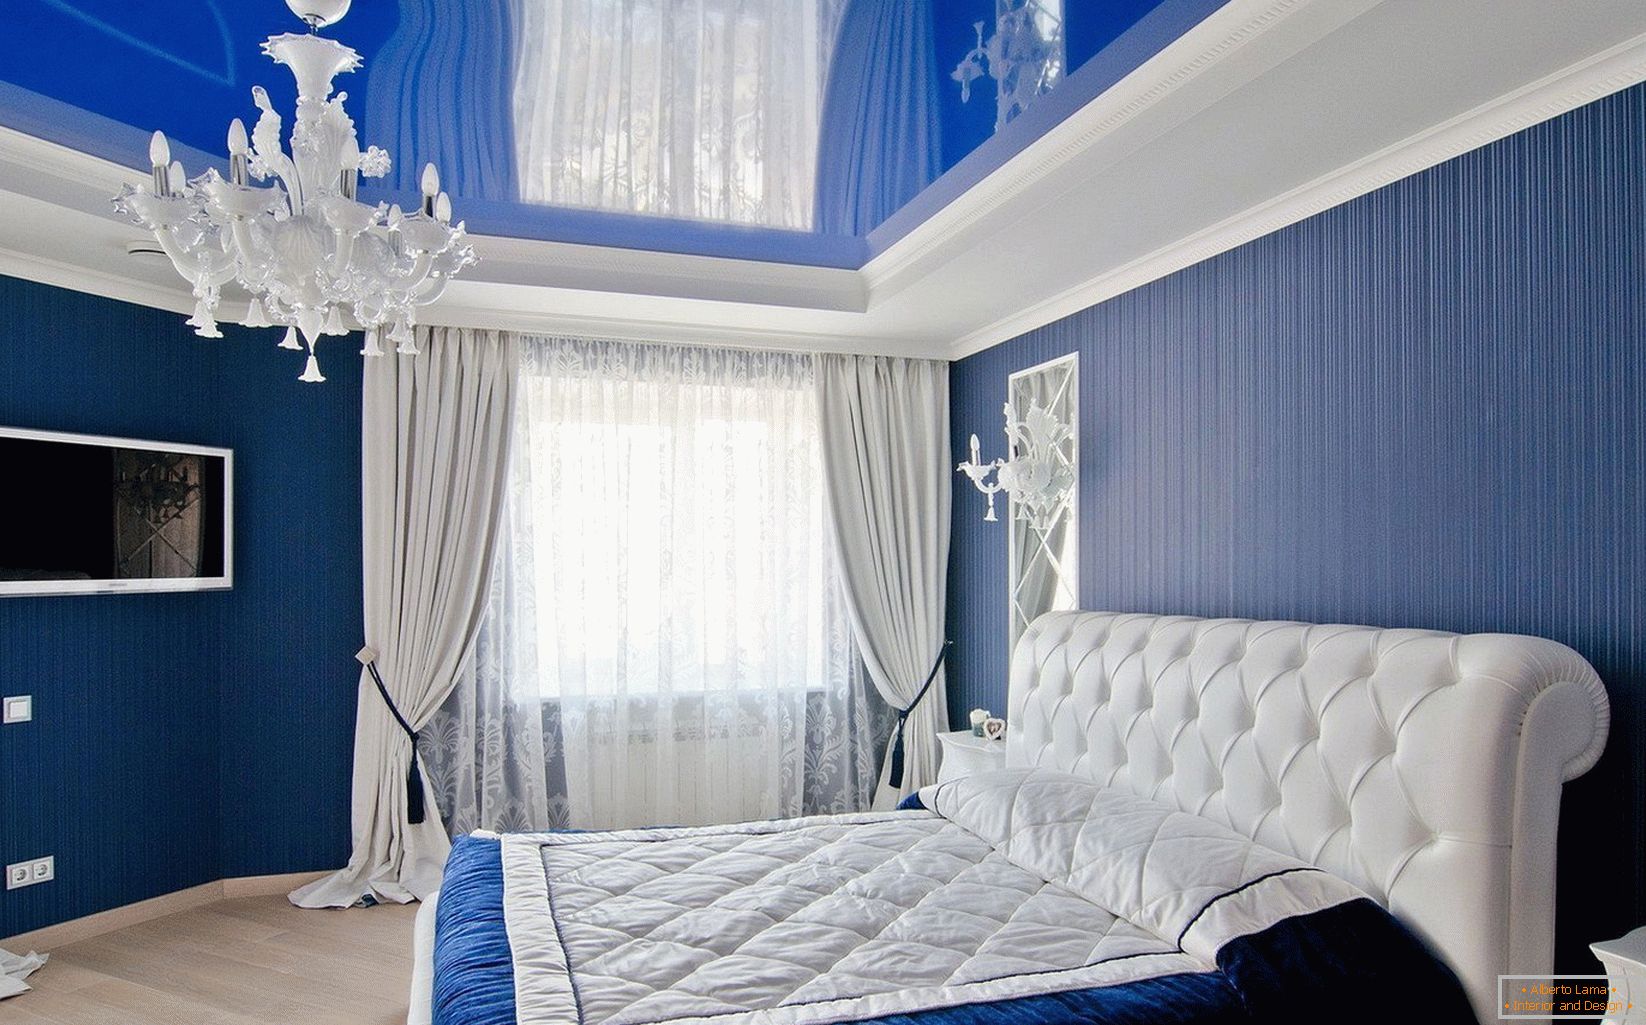 Blue ceiling in the bedroom